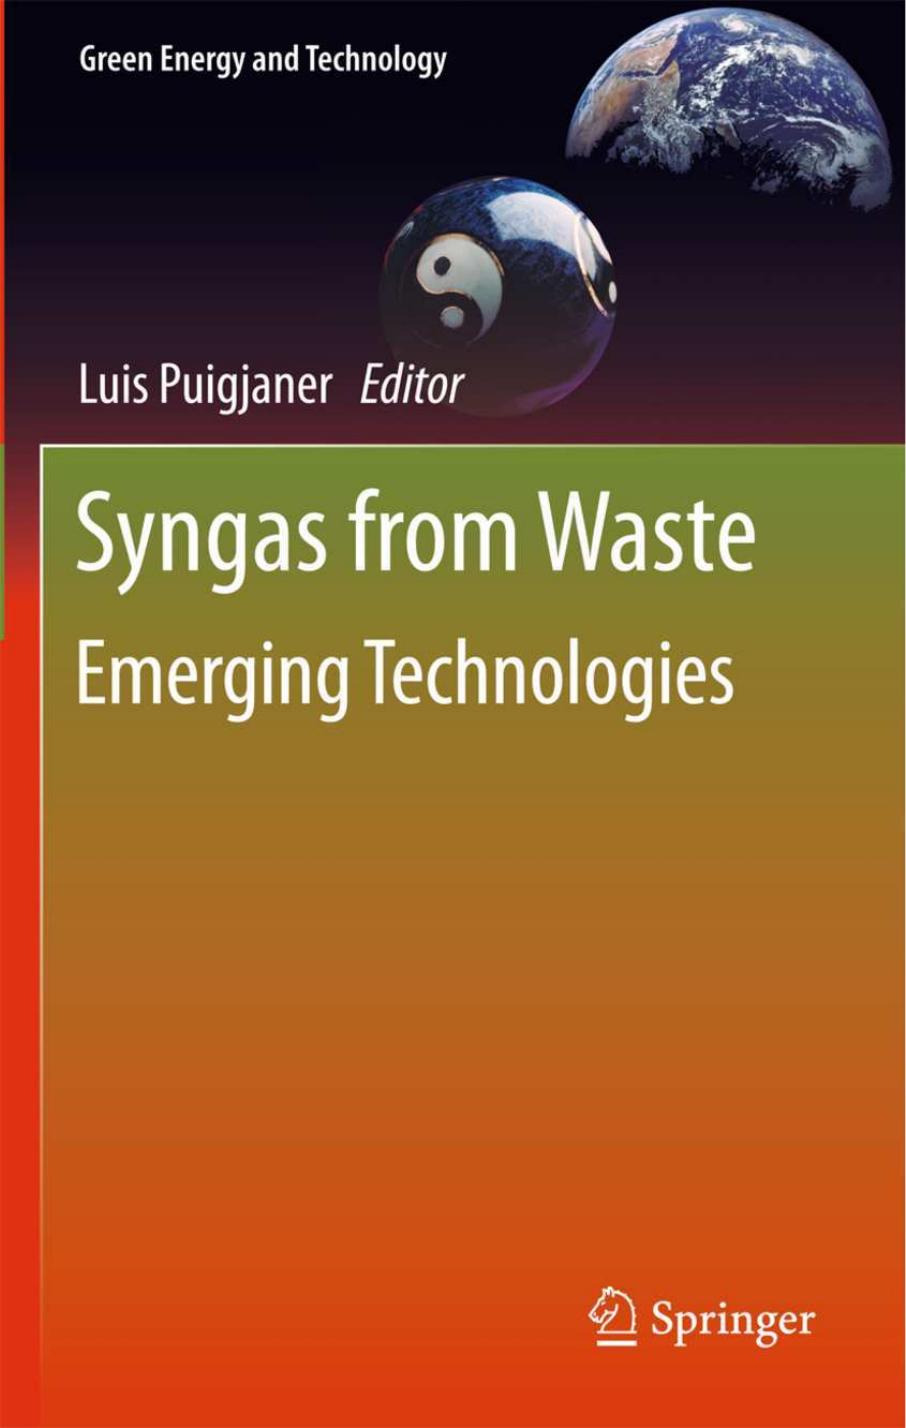 Syngas from Waste by Luis Puigjaner